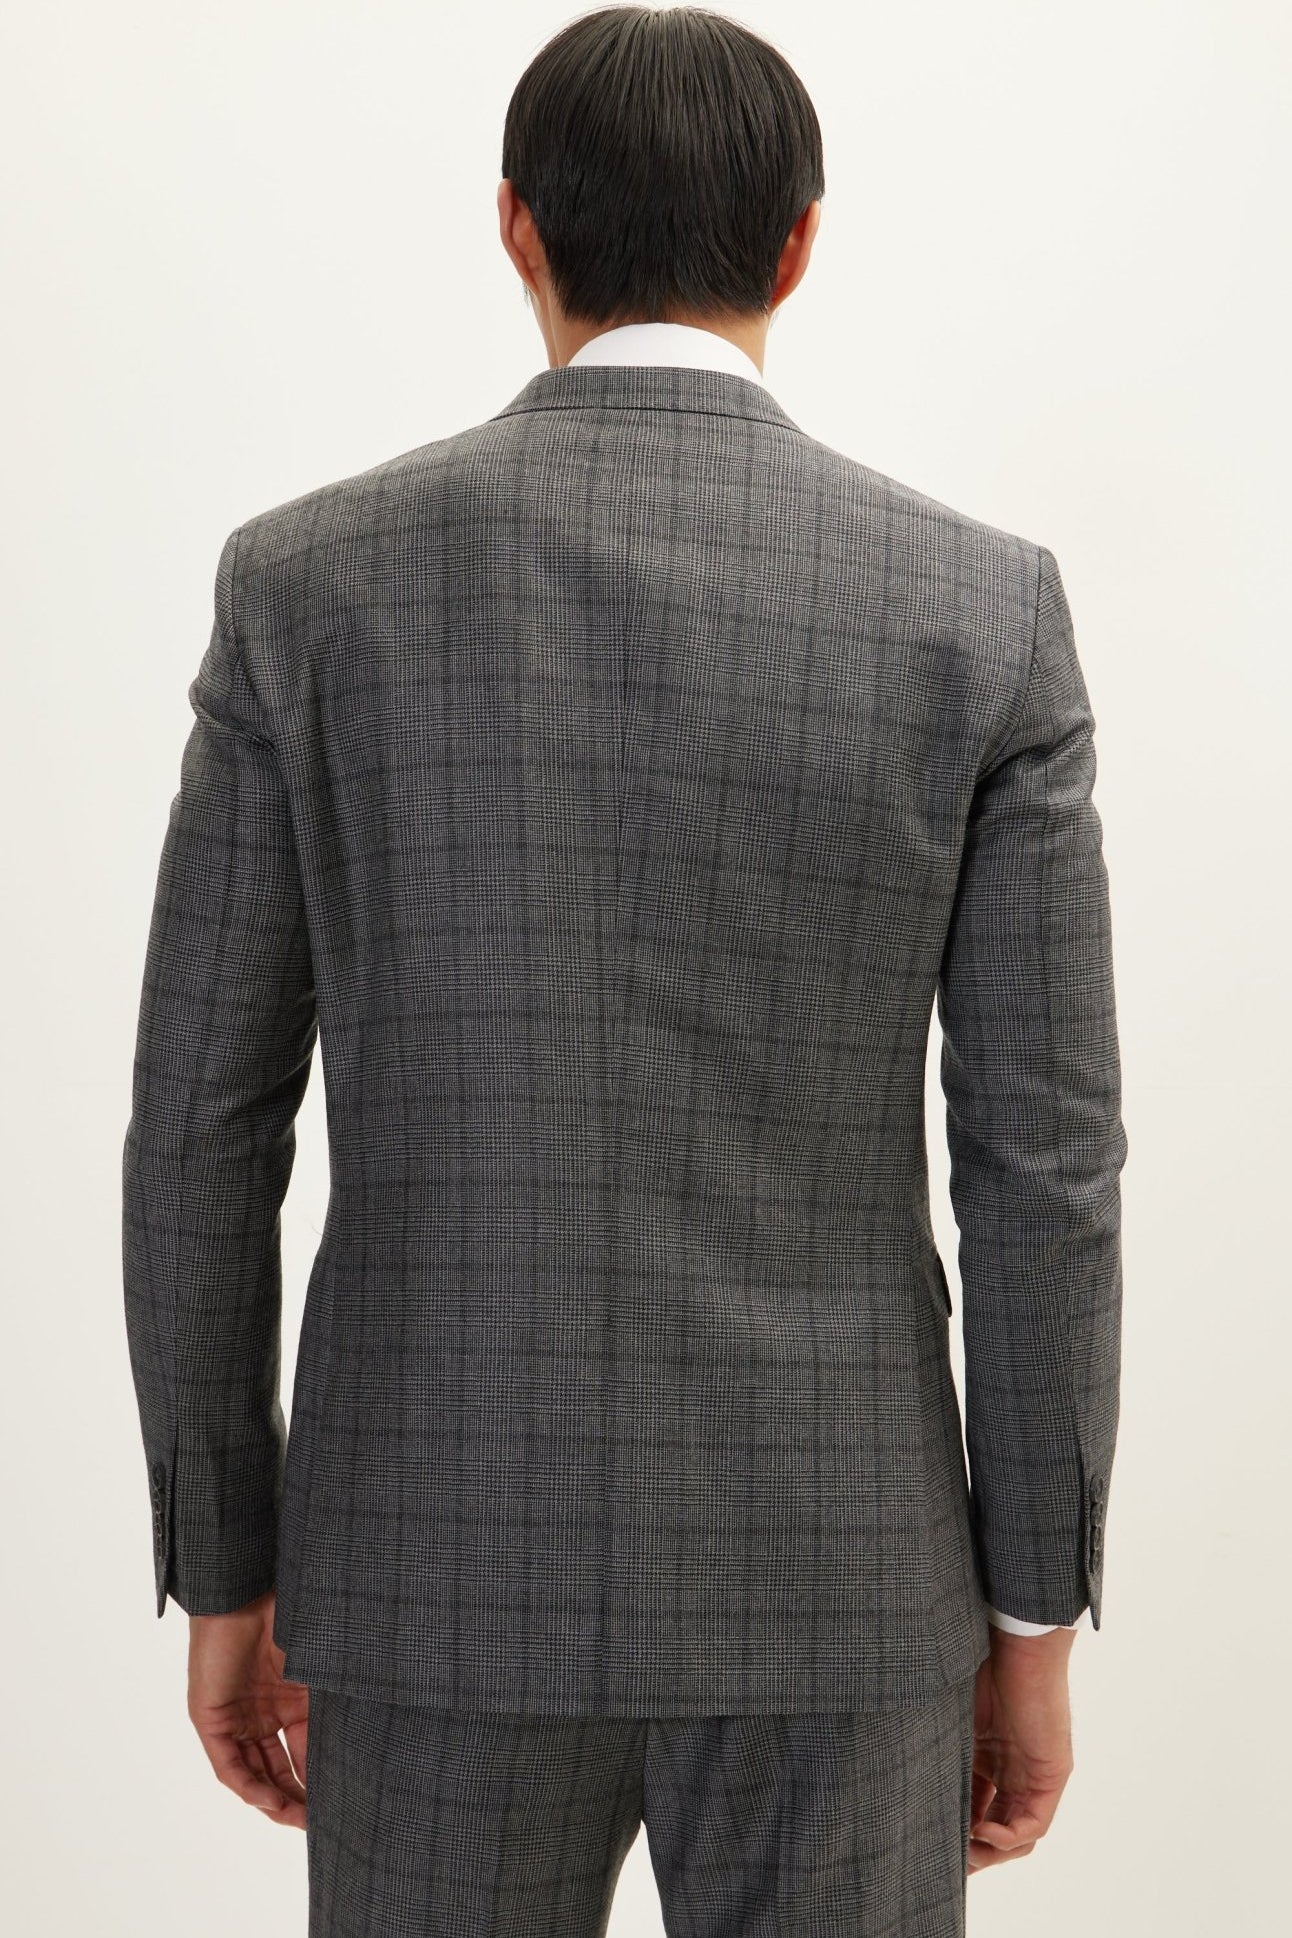 Merino Wool Double Breasted Suit - Charcoal Plaid - Ron Tomson